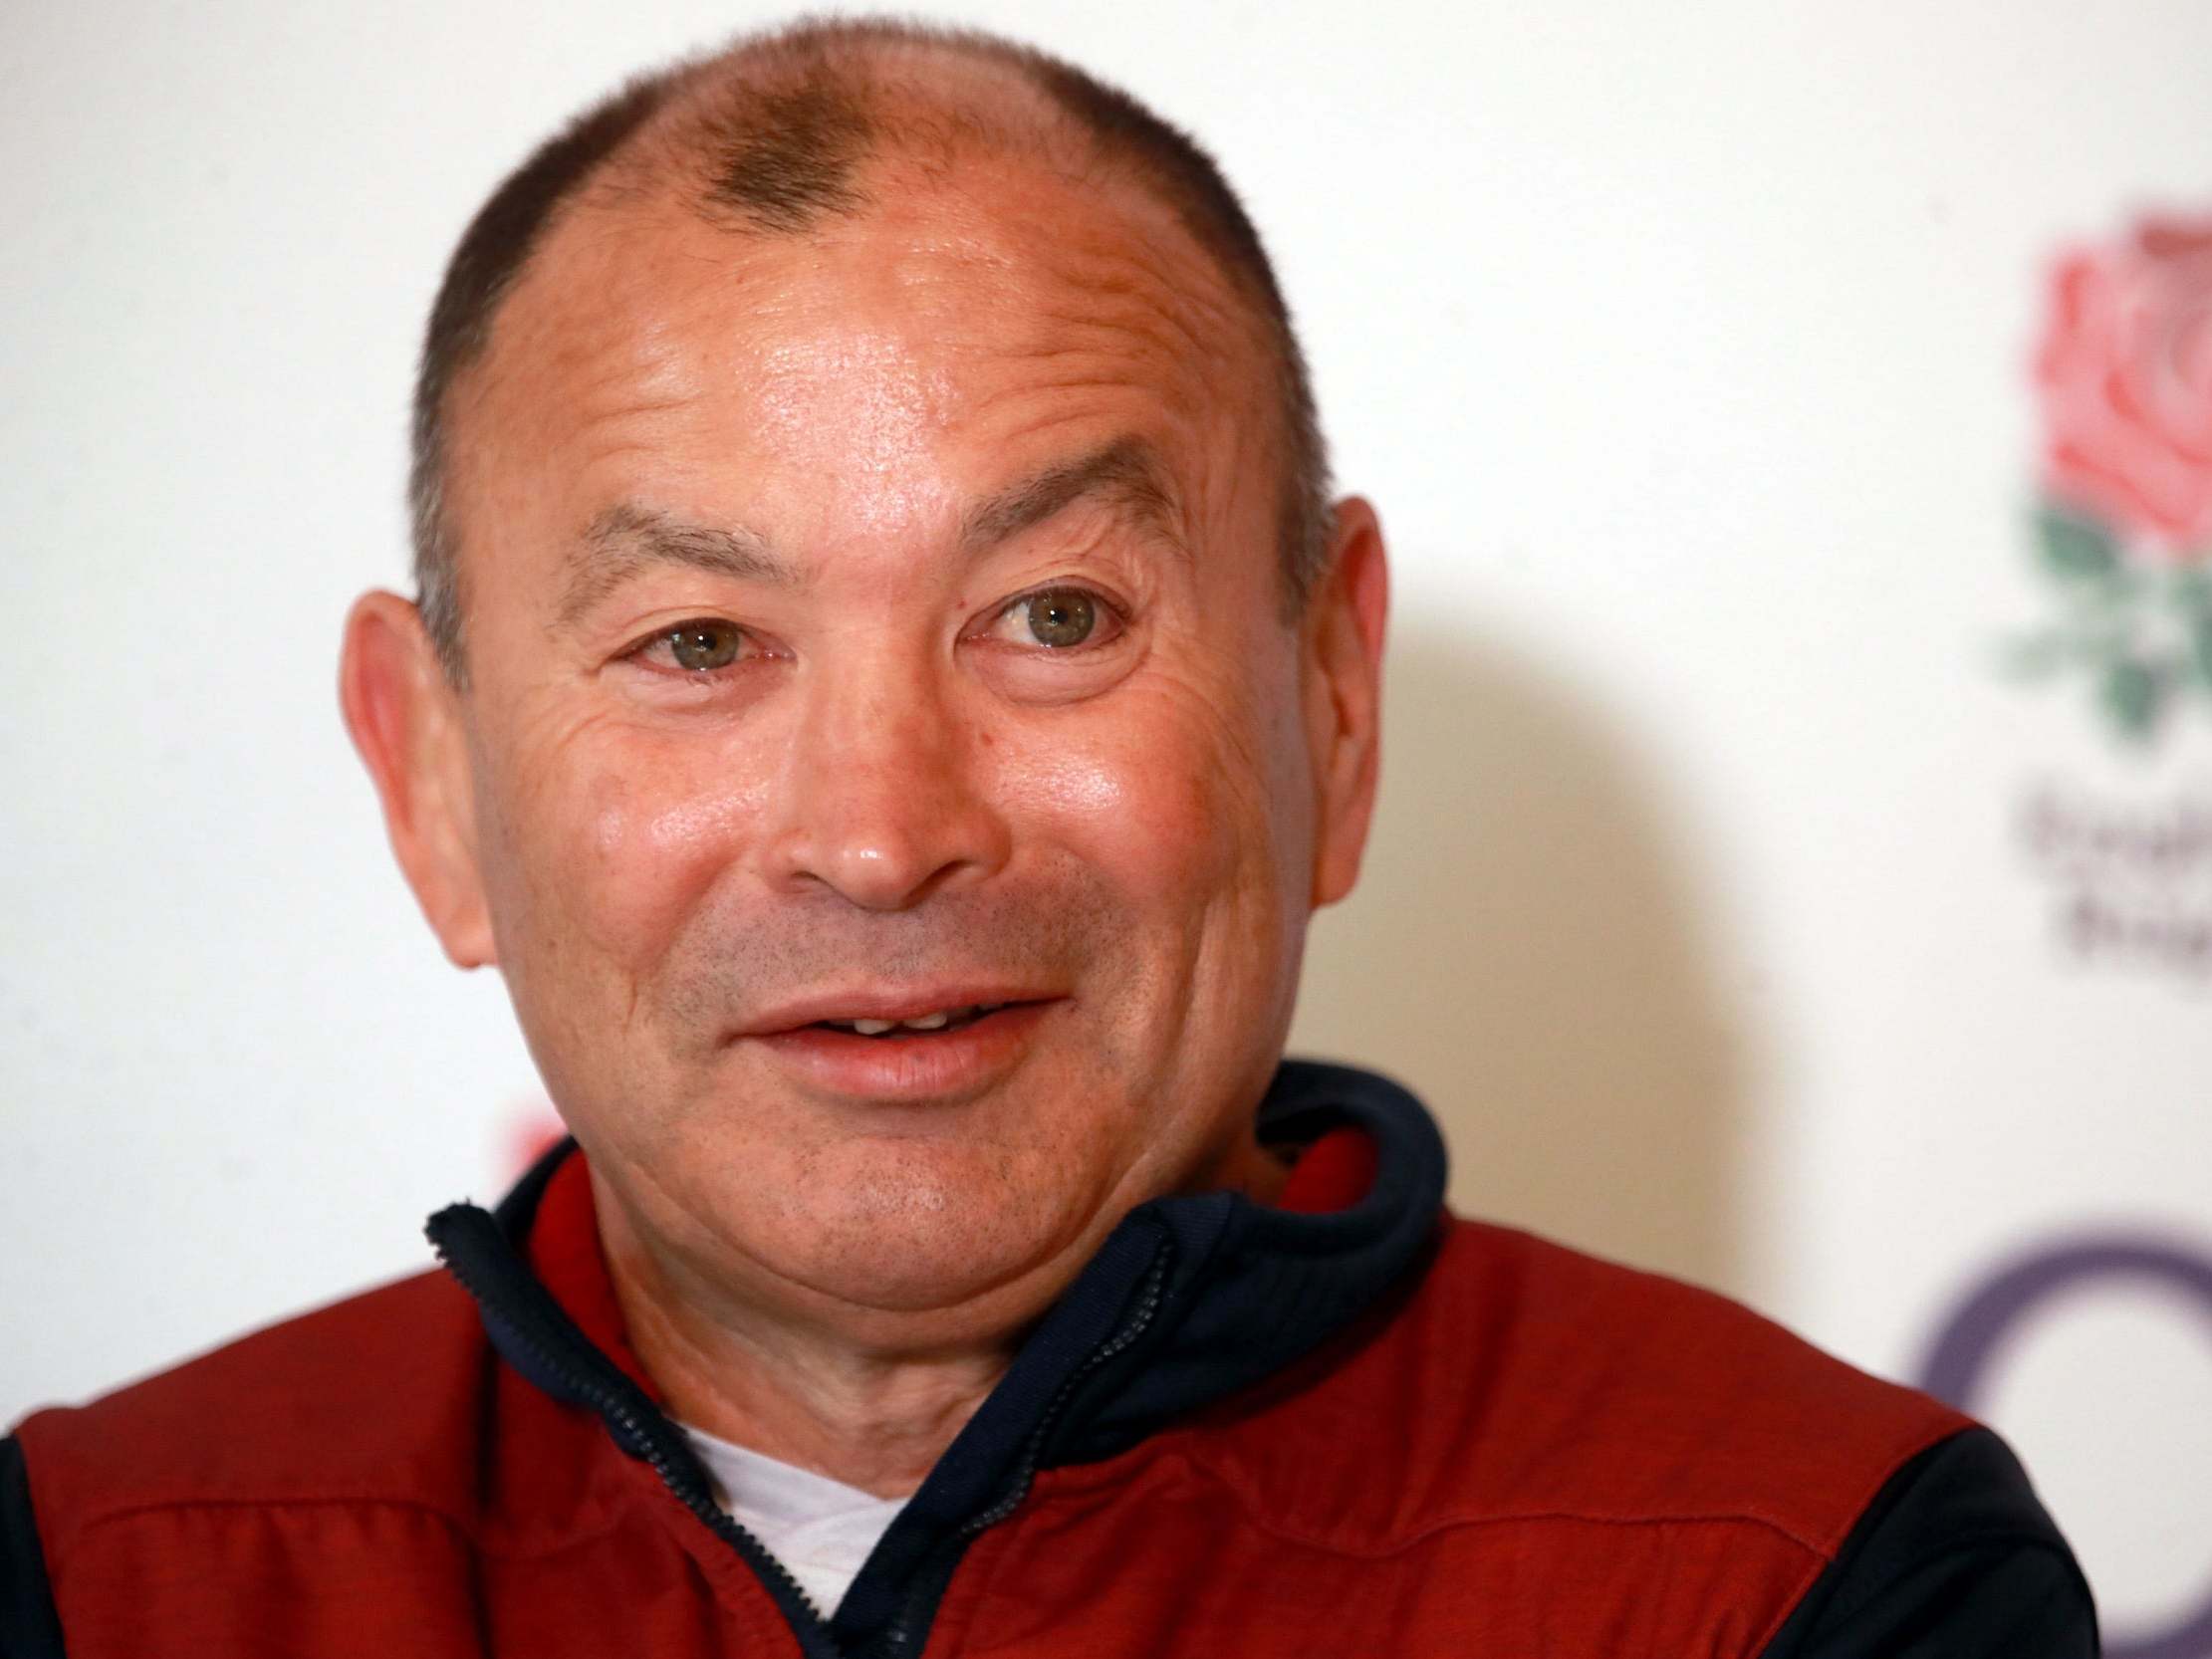 Eddie Jones has not had any conversations about leaving England to take up a role in the NRL